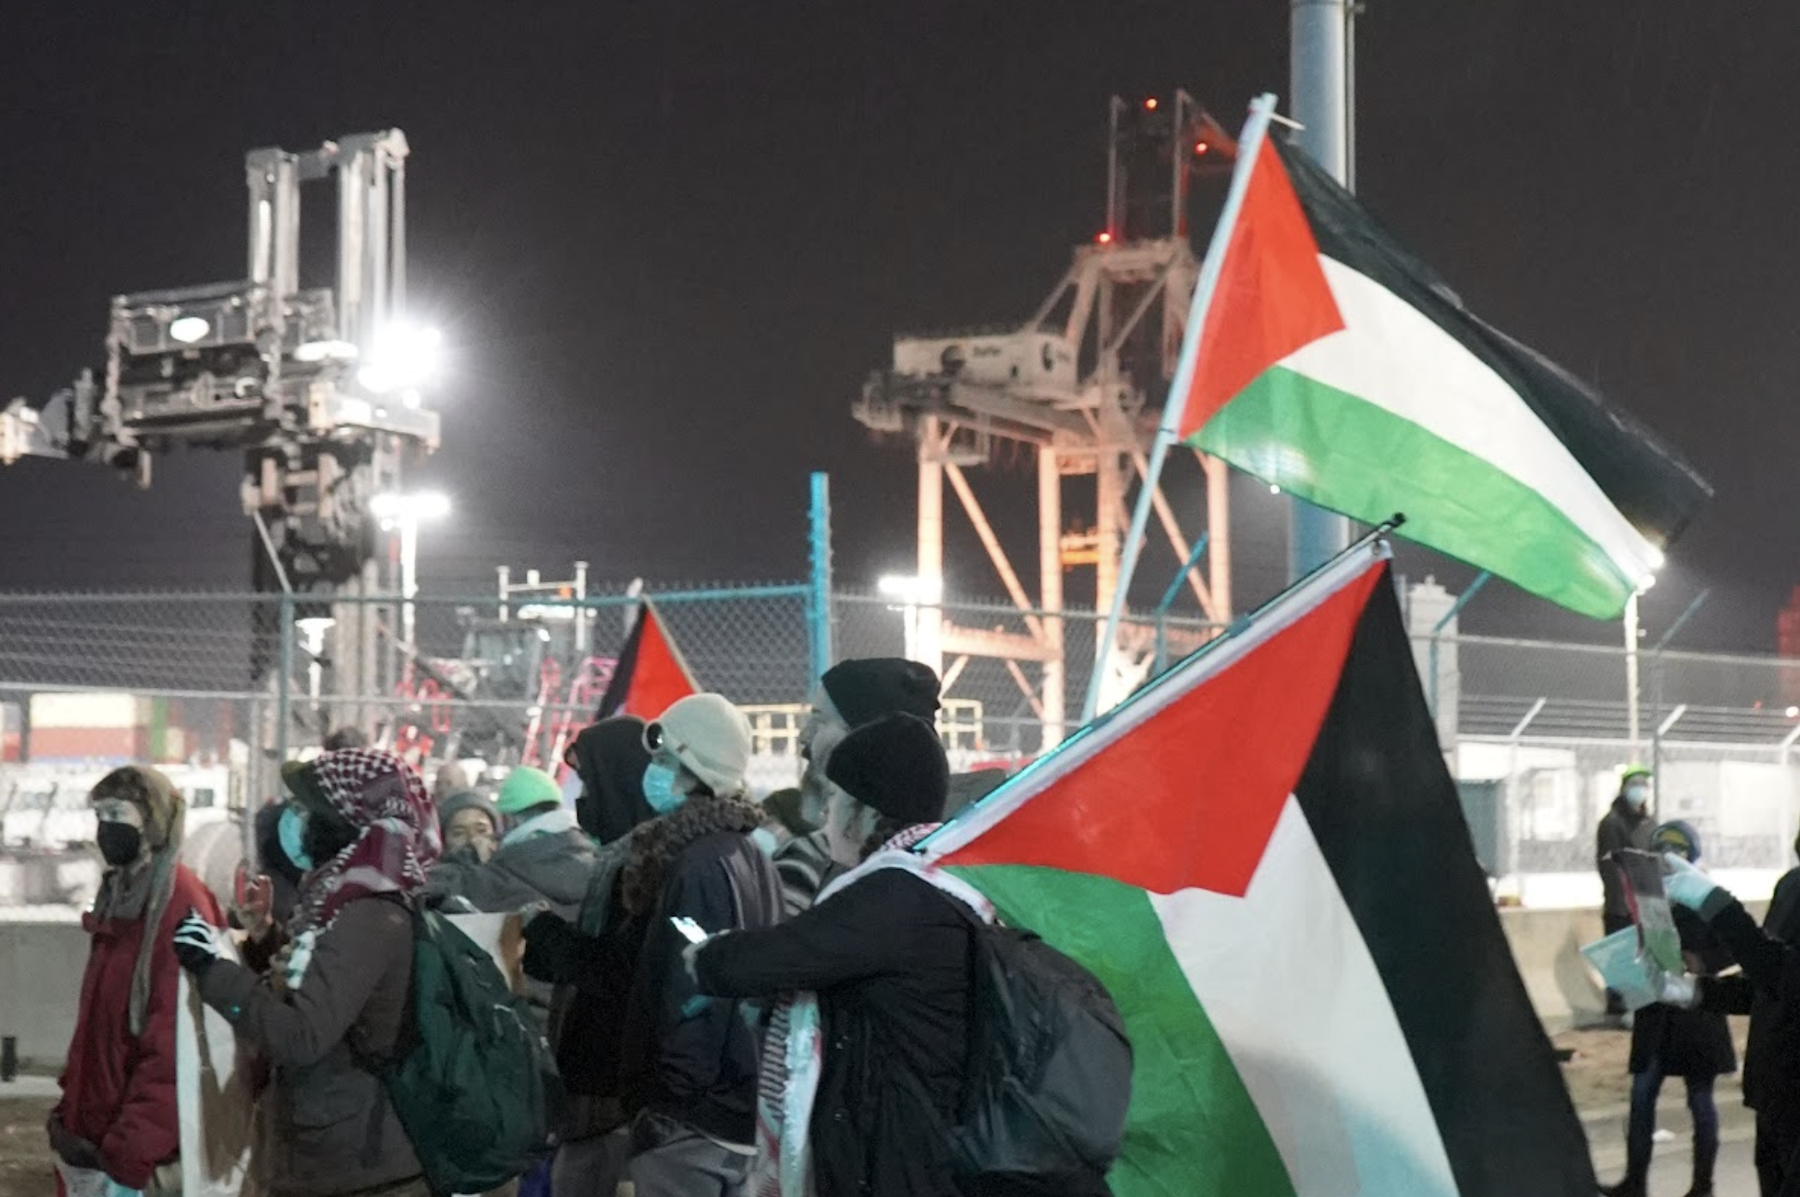 People with Palestinian flags gathered at the Port of Oakland.